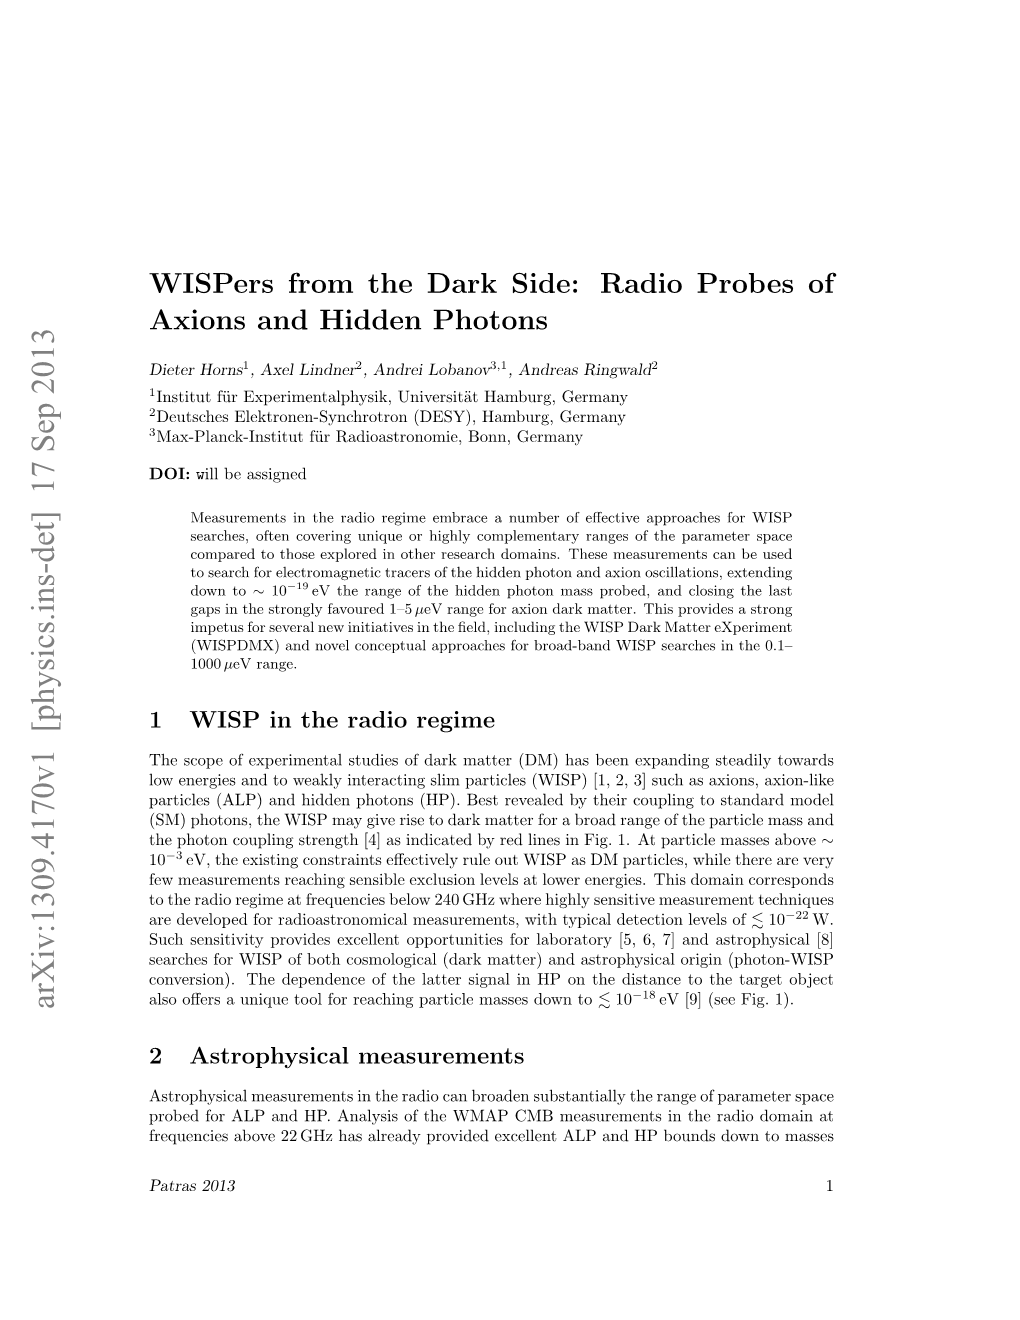 Wispers from the Dark Side: Radio Probes of Axions and Hidden Photons